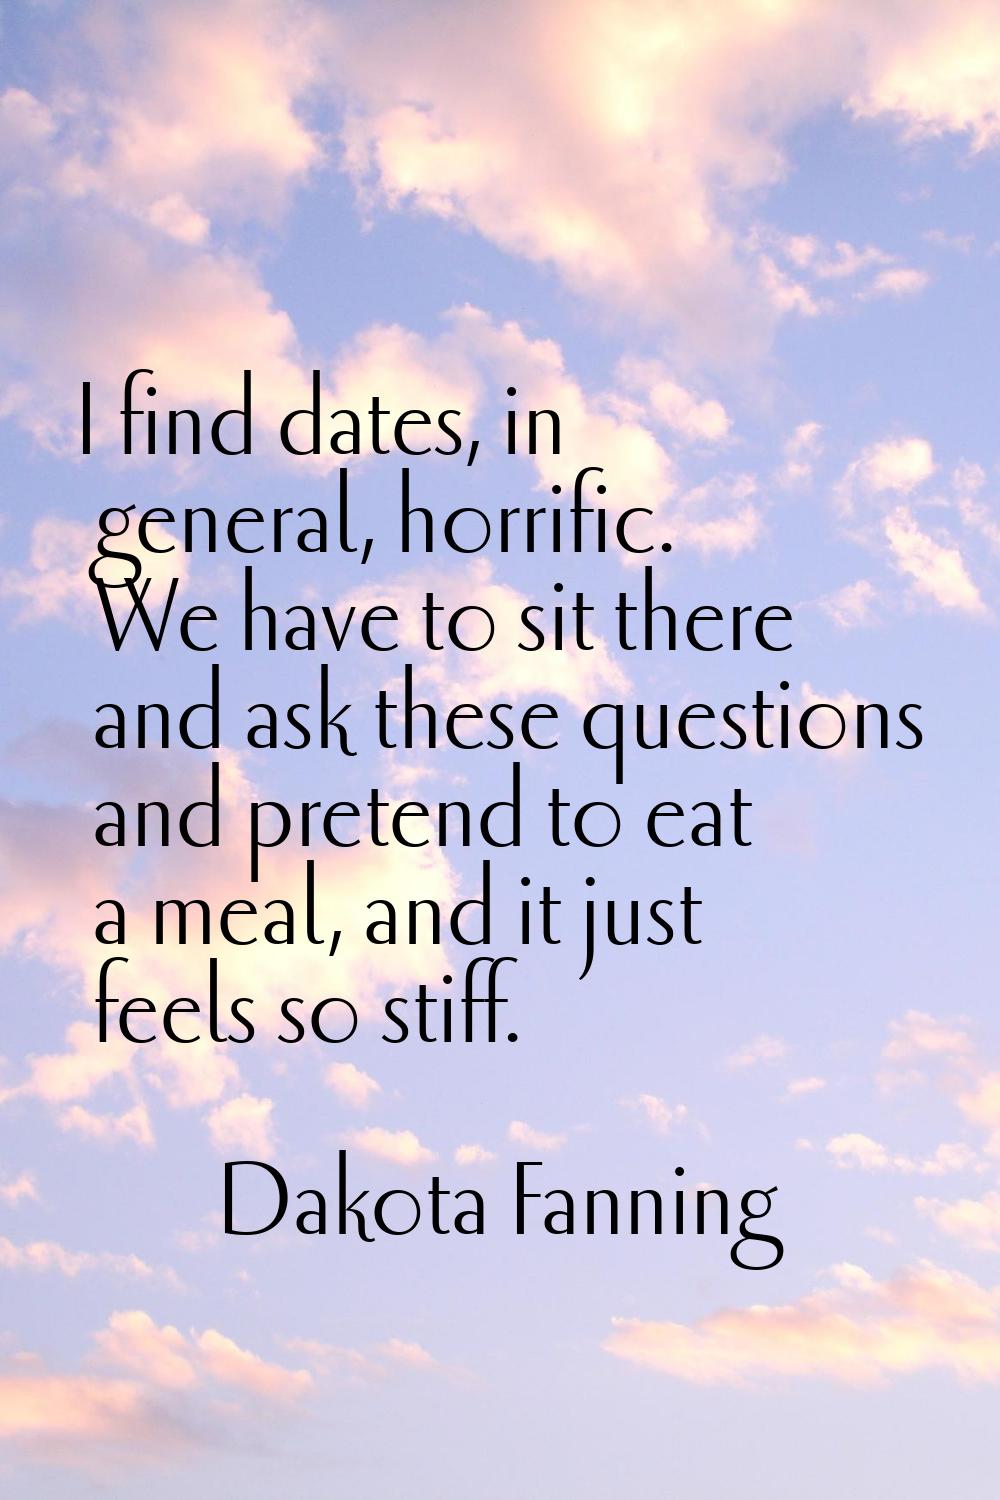 I find dates, in general, horrific. We have to sit there and ask these questions and pretend to eat